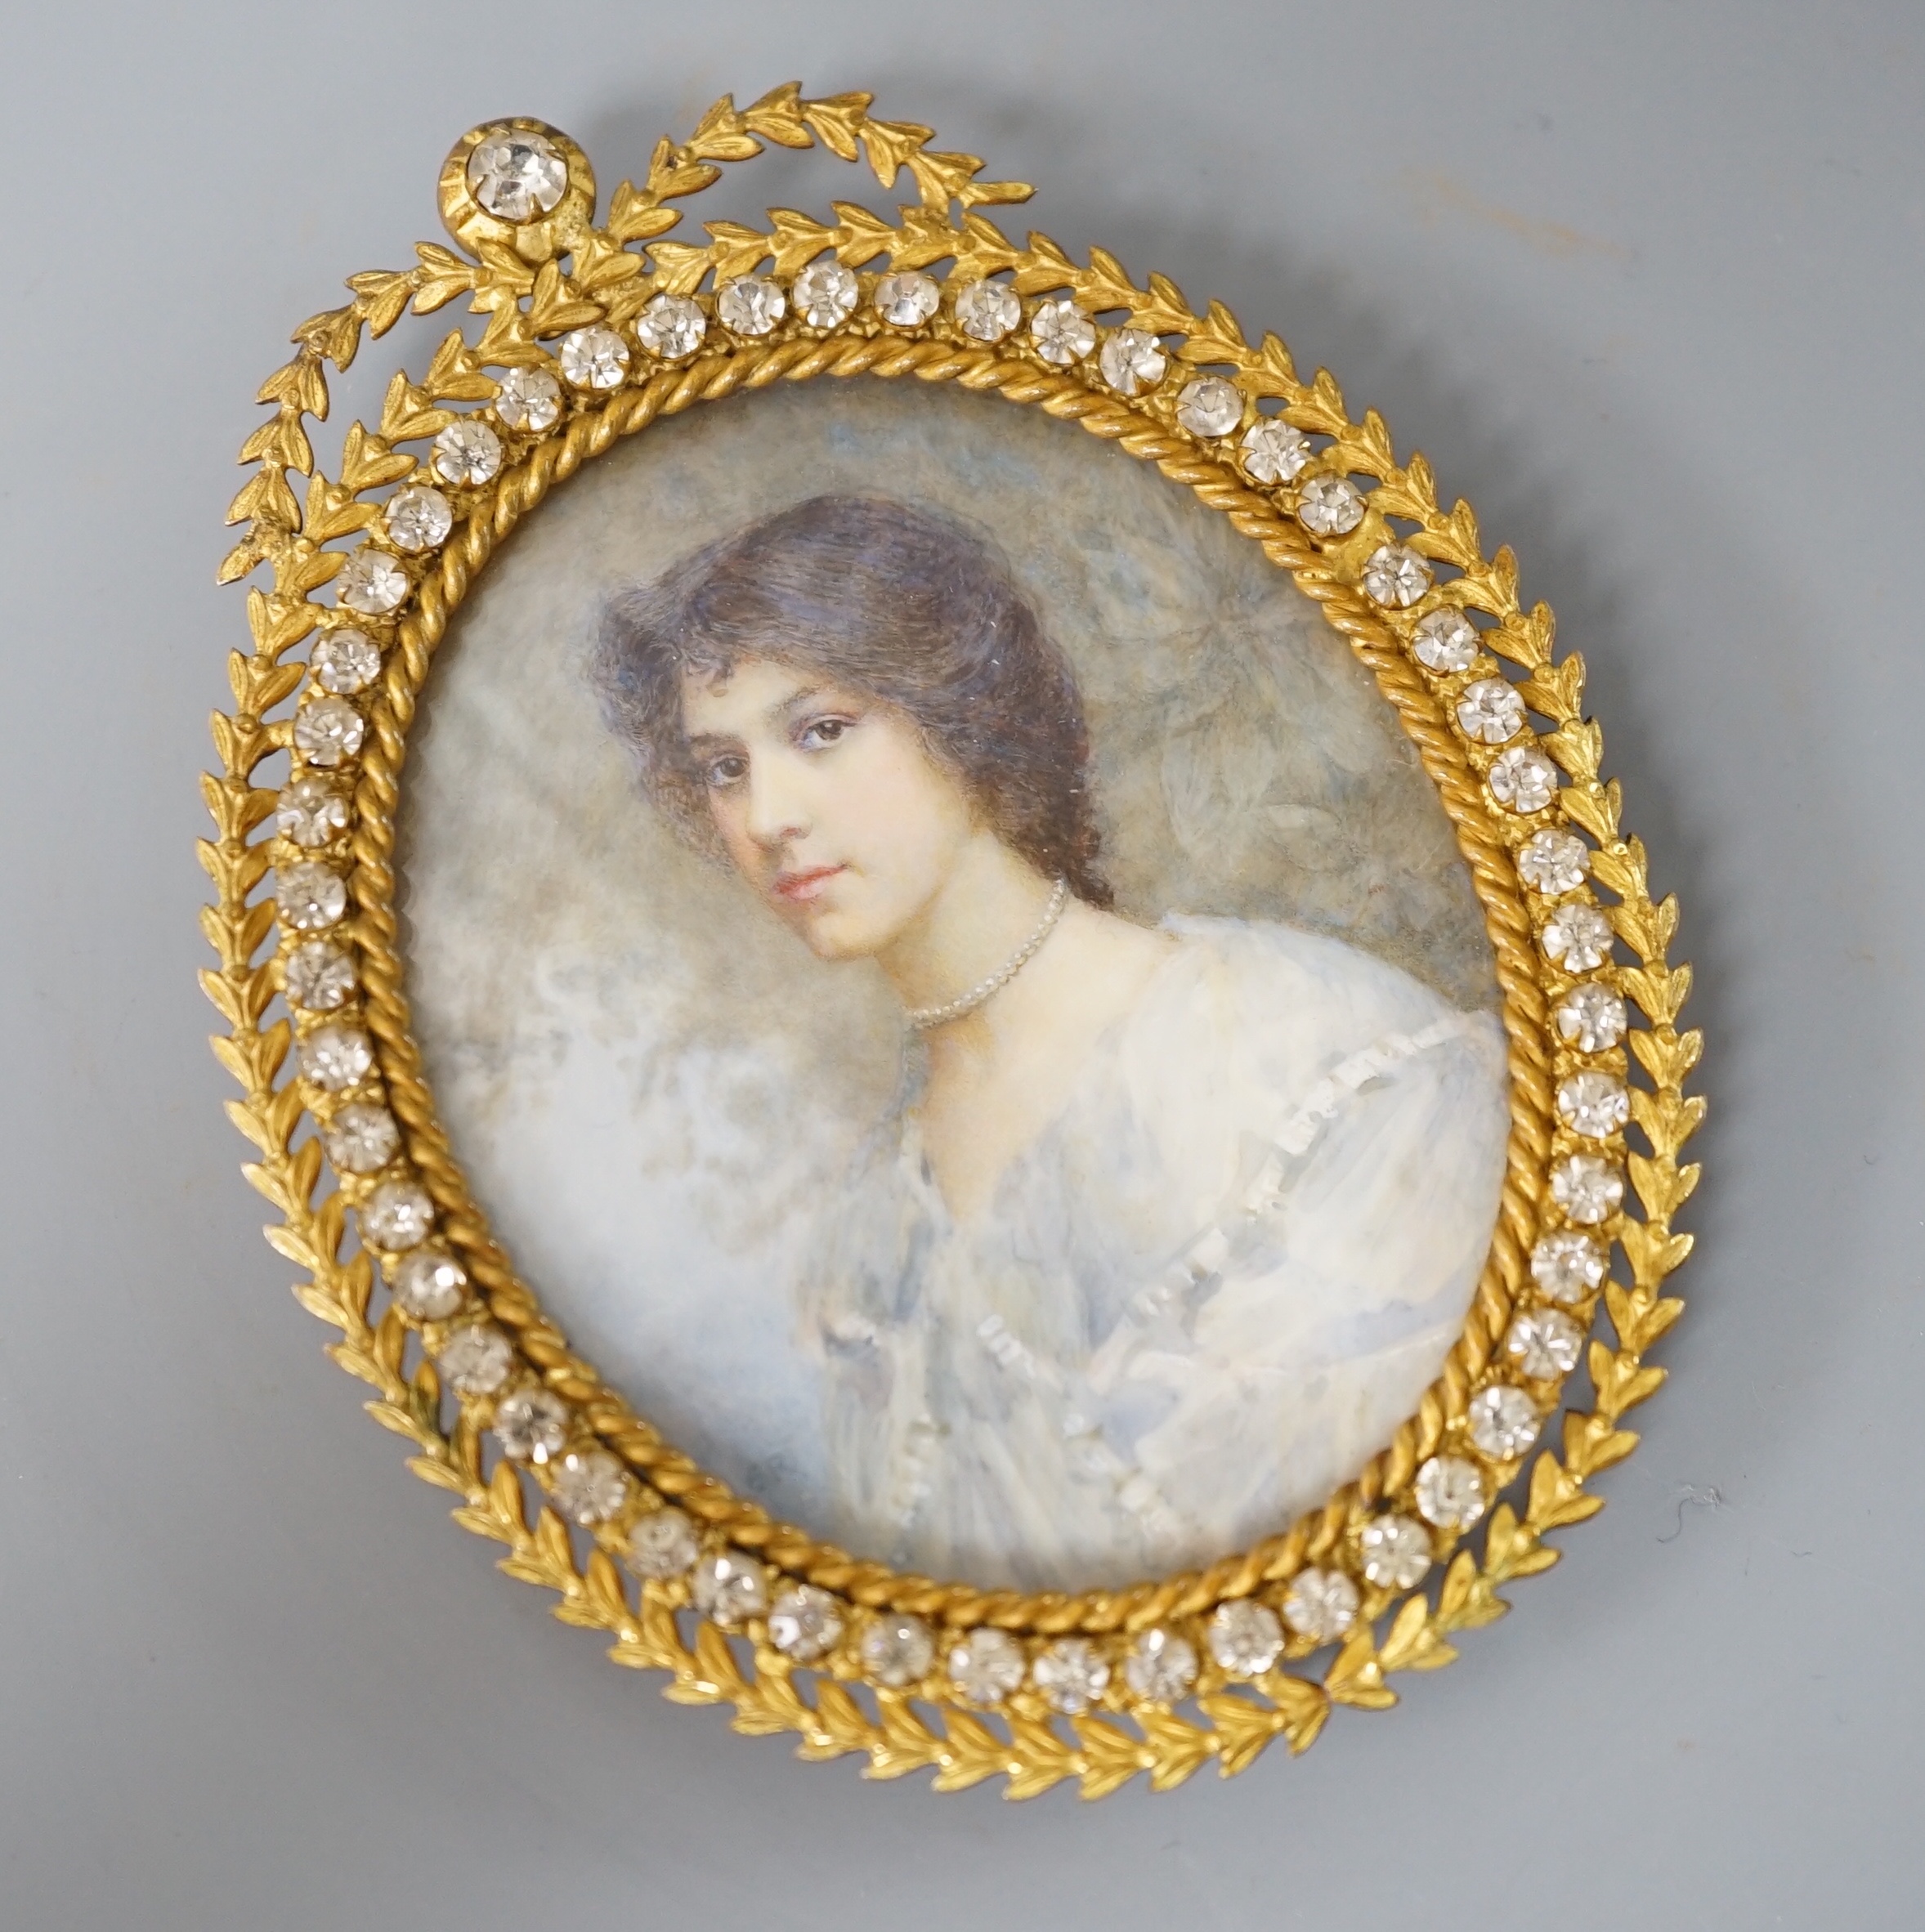 Edith Rowland (1901-1940) watercolour on ivory, portrait miniature of Maud. Paste and gilt metal frame - 10cm high